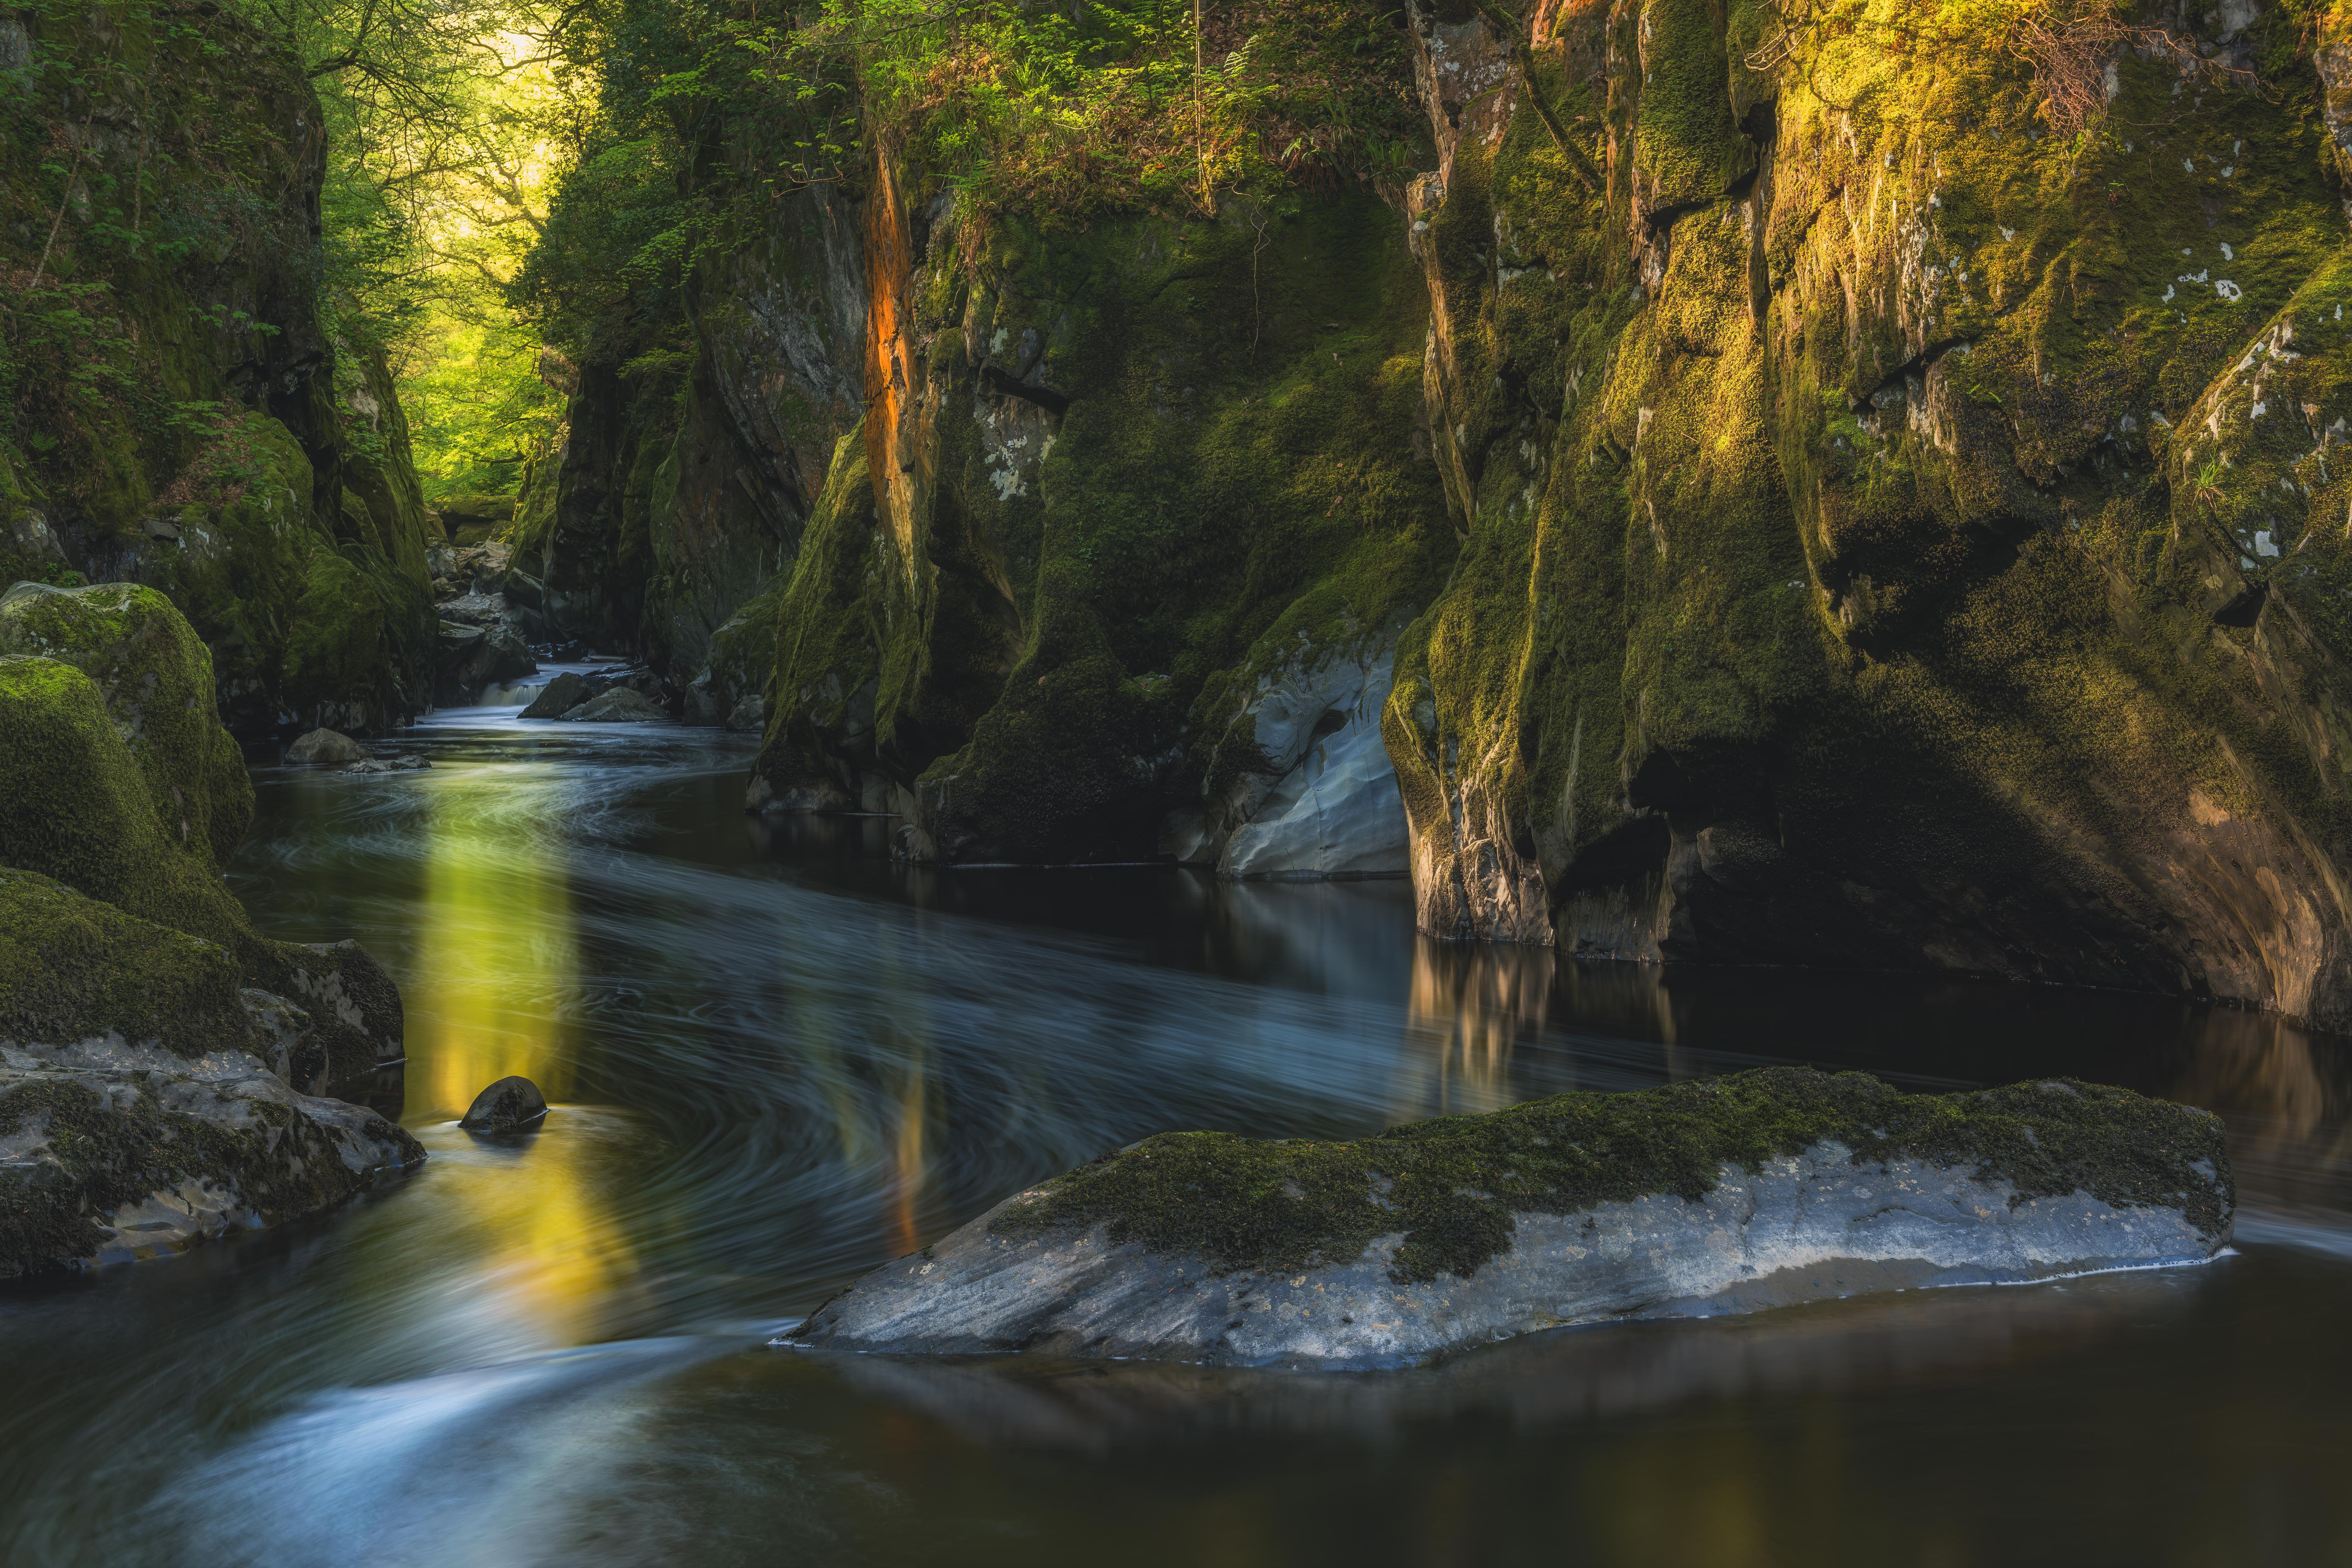 River Long Exposure Wales UK Nature Forest Moss Cliff Rocks Trees 6300x4200